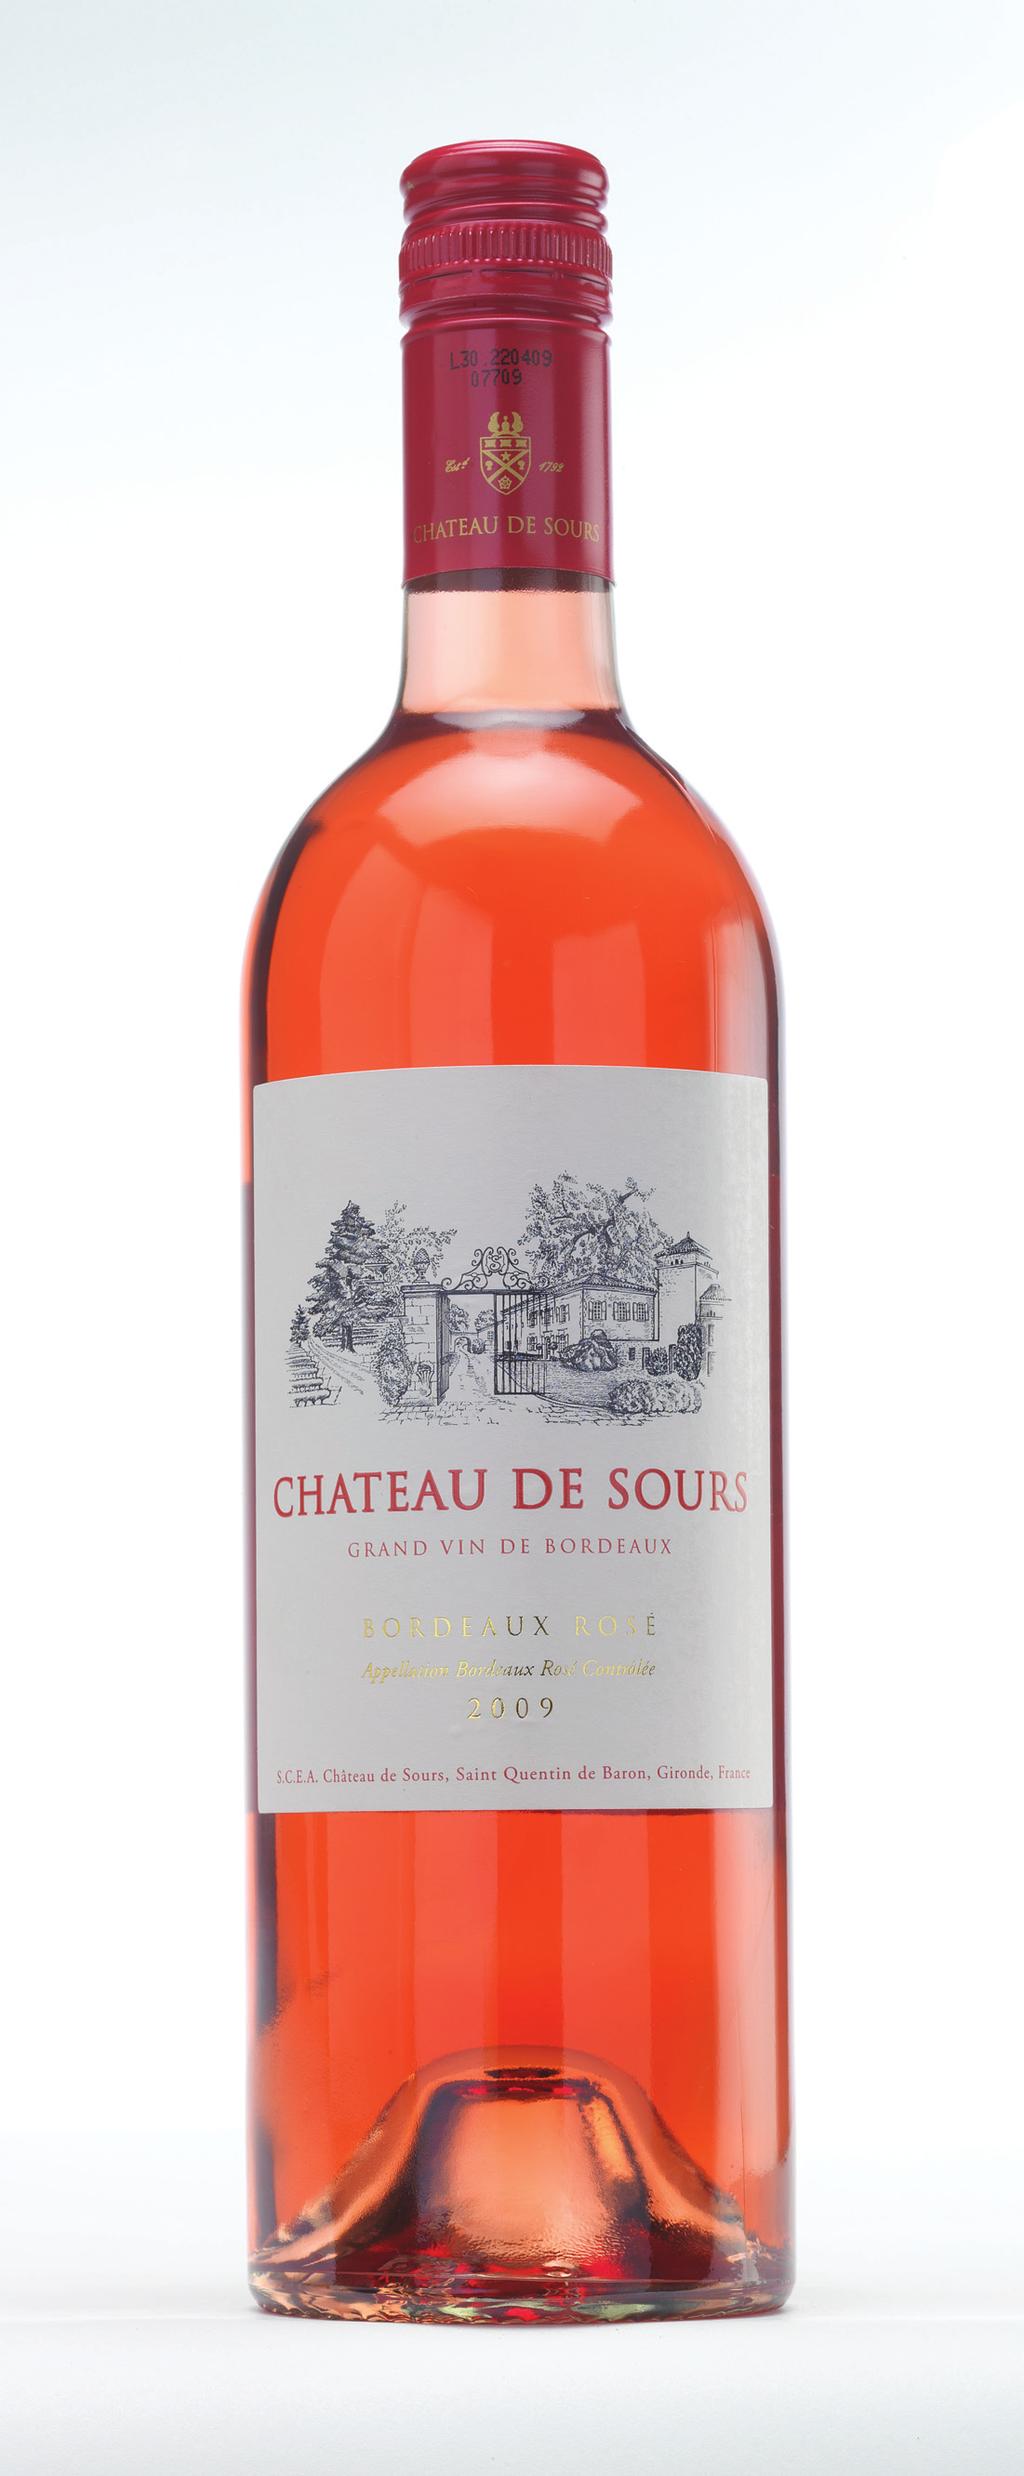 Chateau de Sours Rose 2009 2009 was another very successful vintage for Chateau de Sours Rose, with harvest commencing in the first week of September in warm and sunny conditions after a very